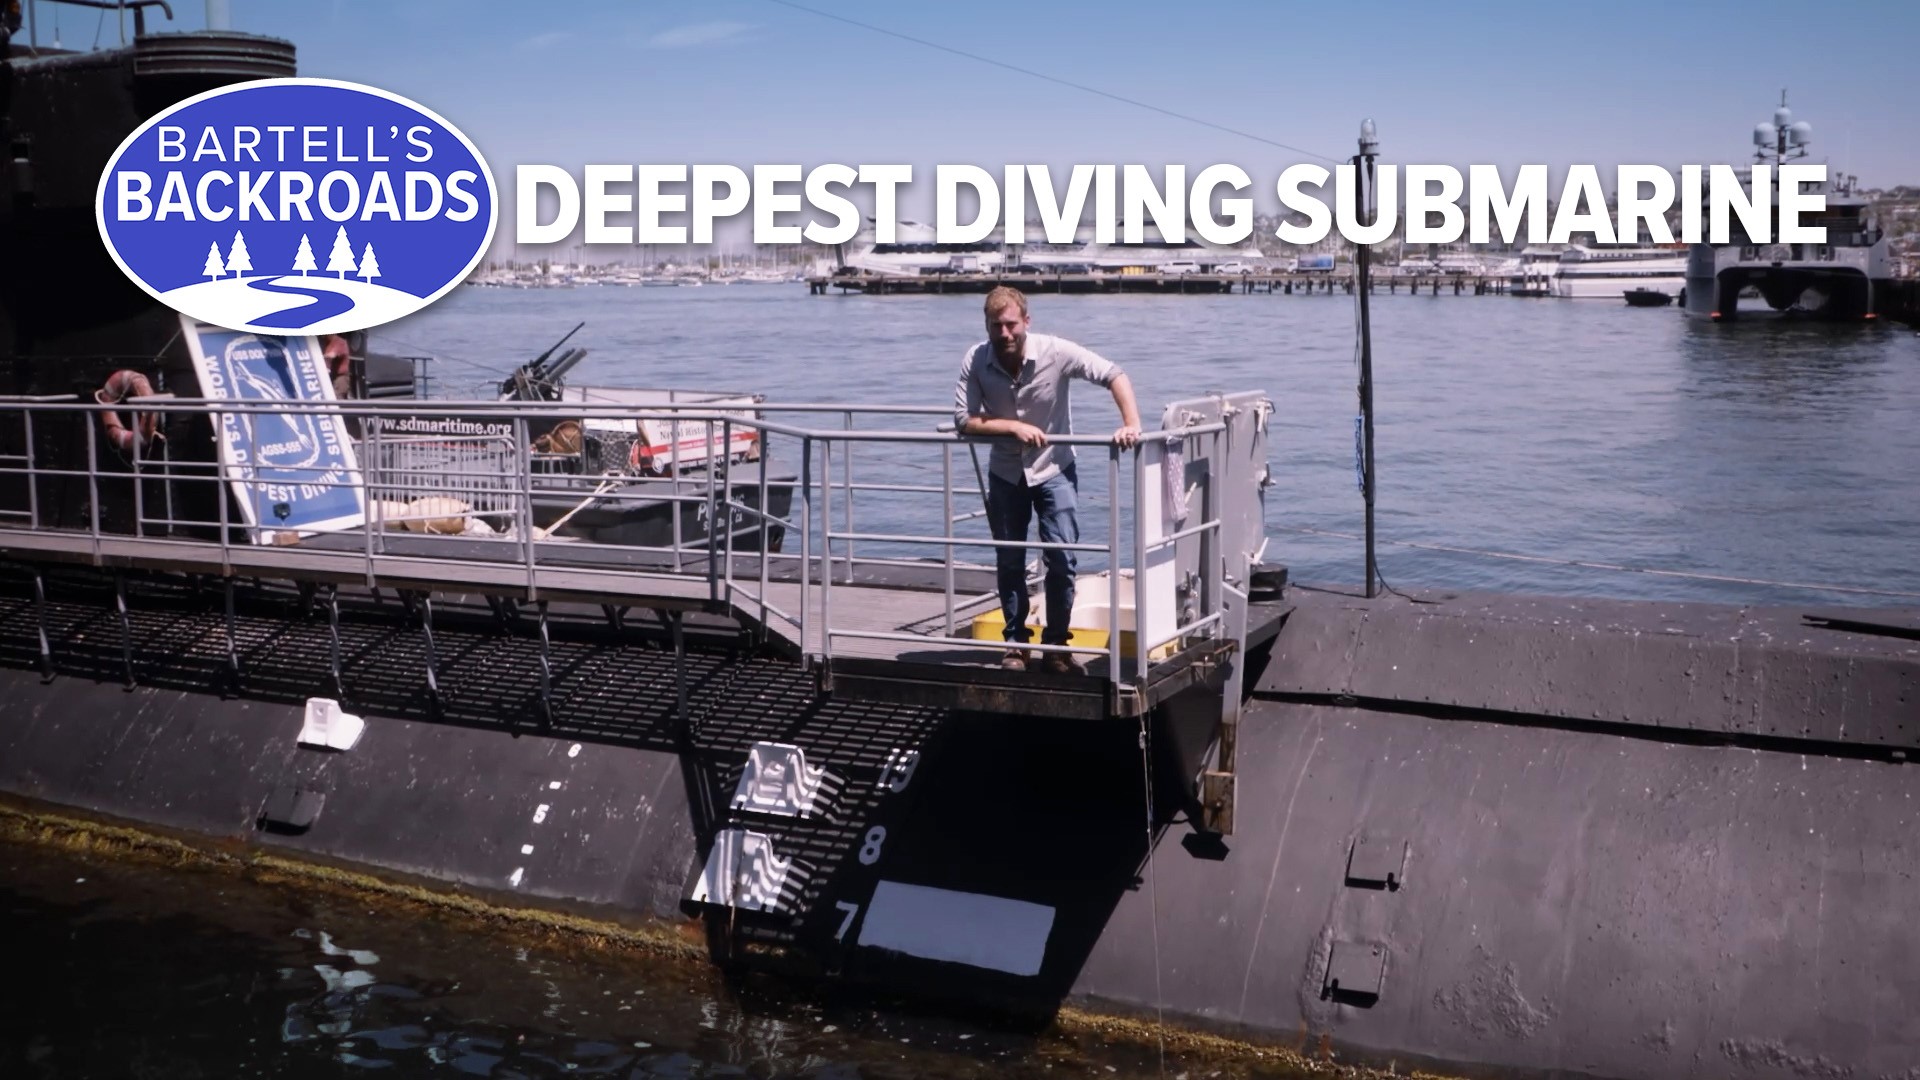 “Home to the deepest diving submarine in the world.”